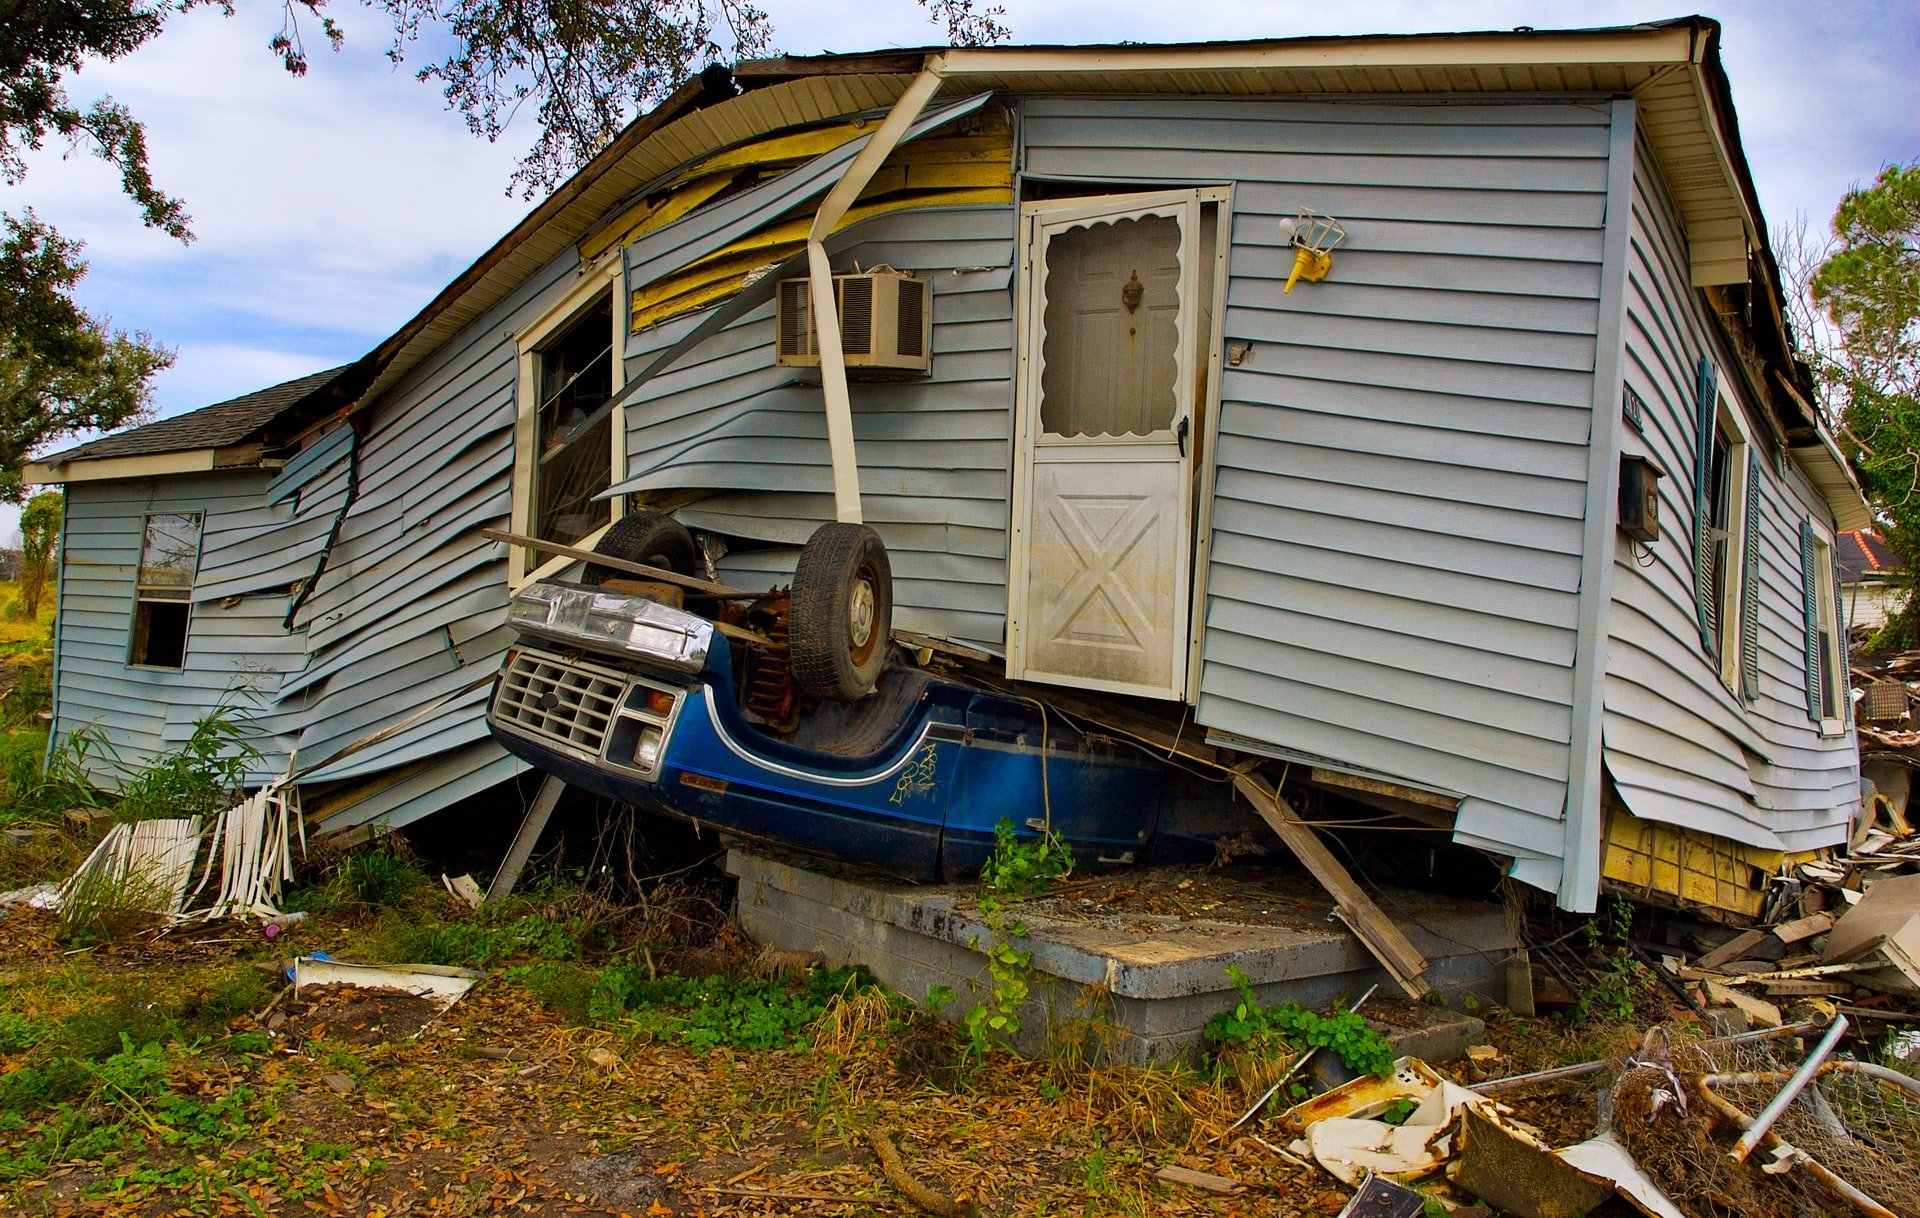 The hurricane had destroyed many houses | Source: Unsplash